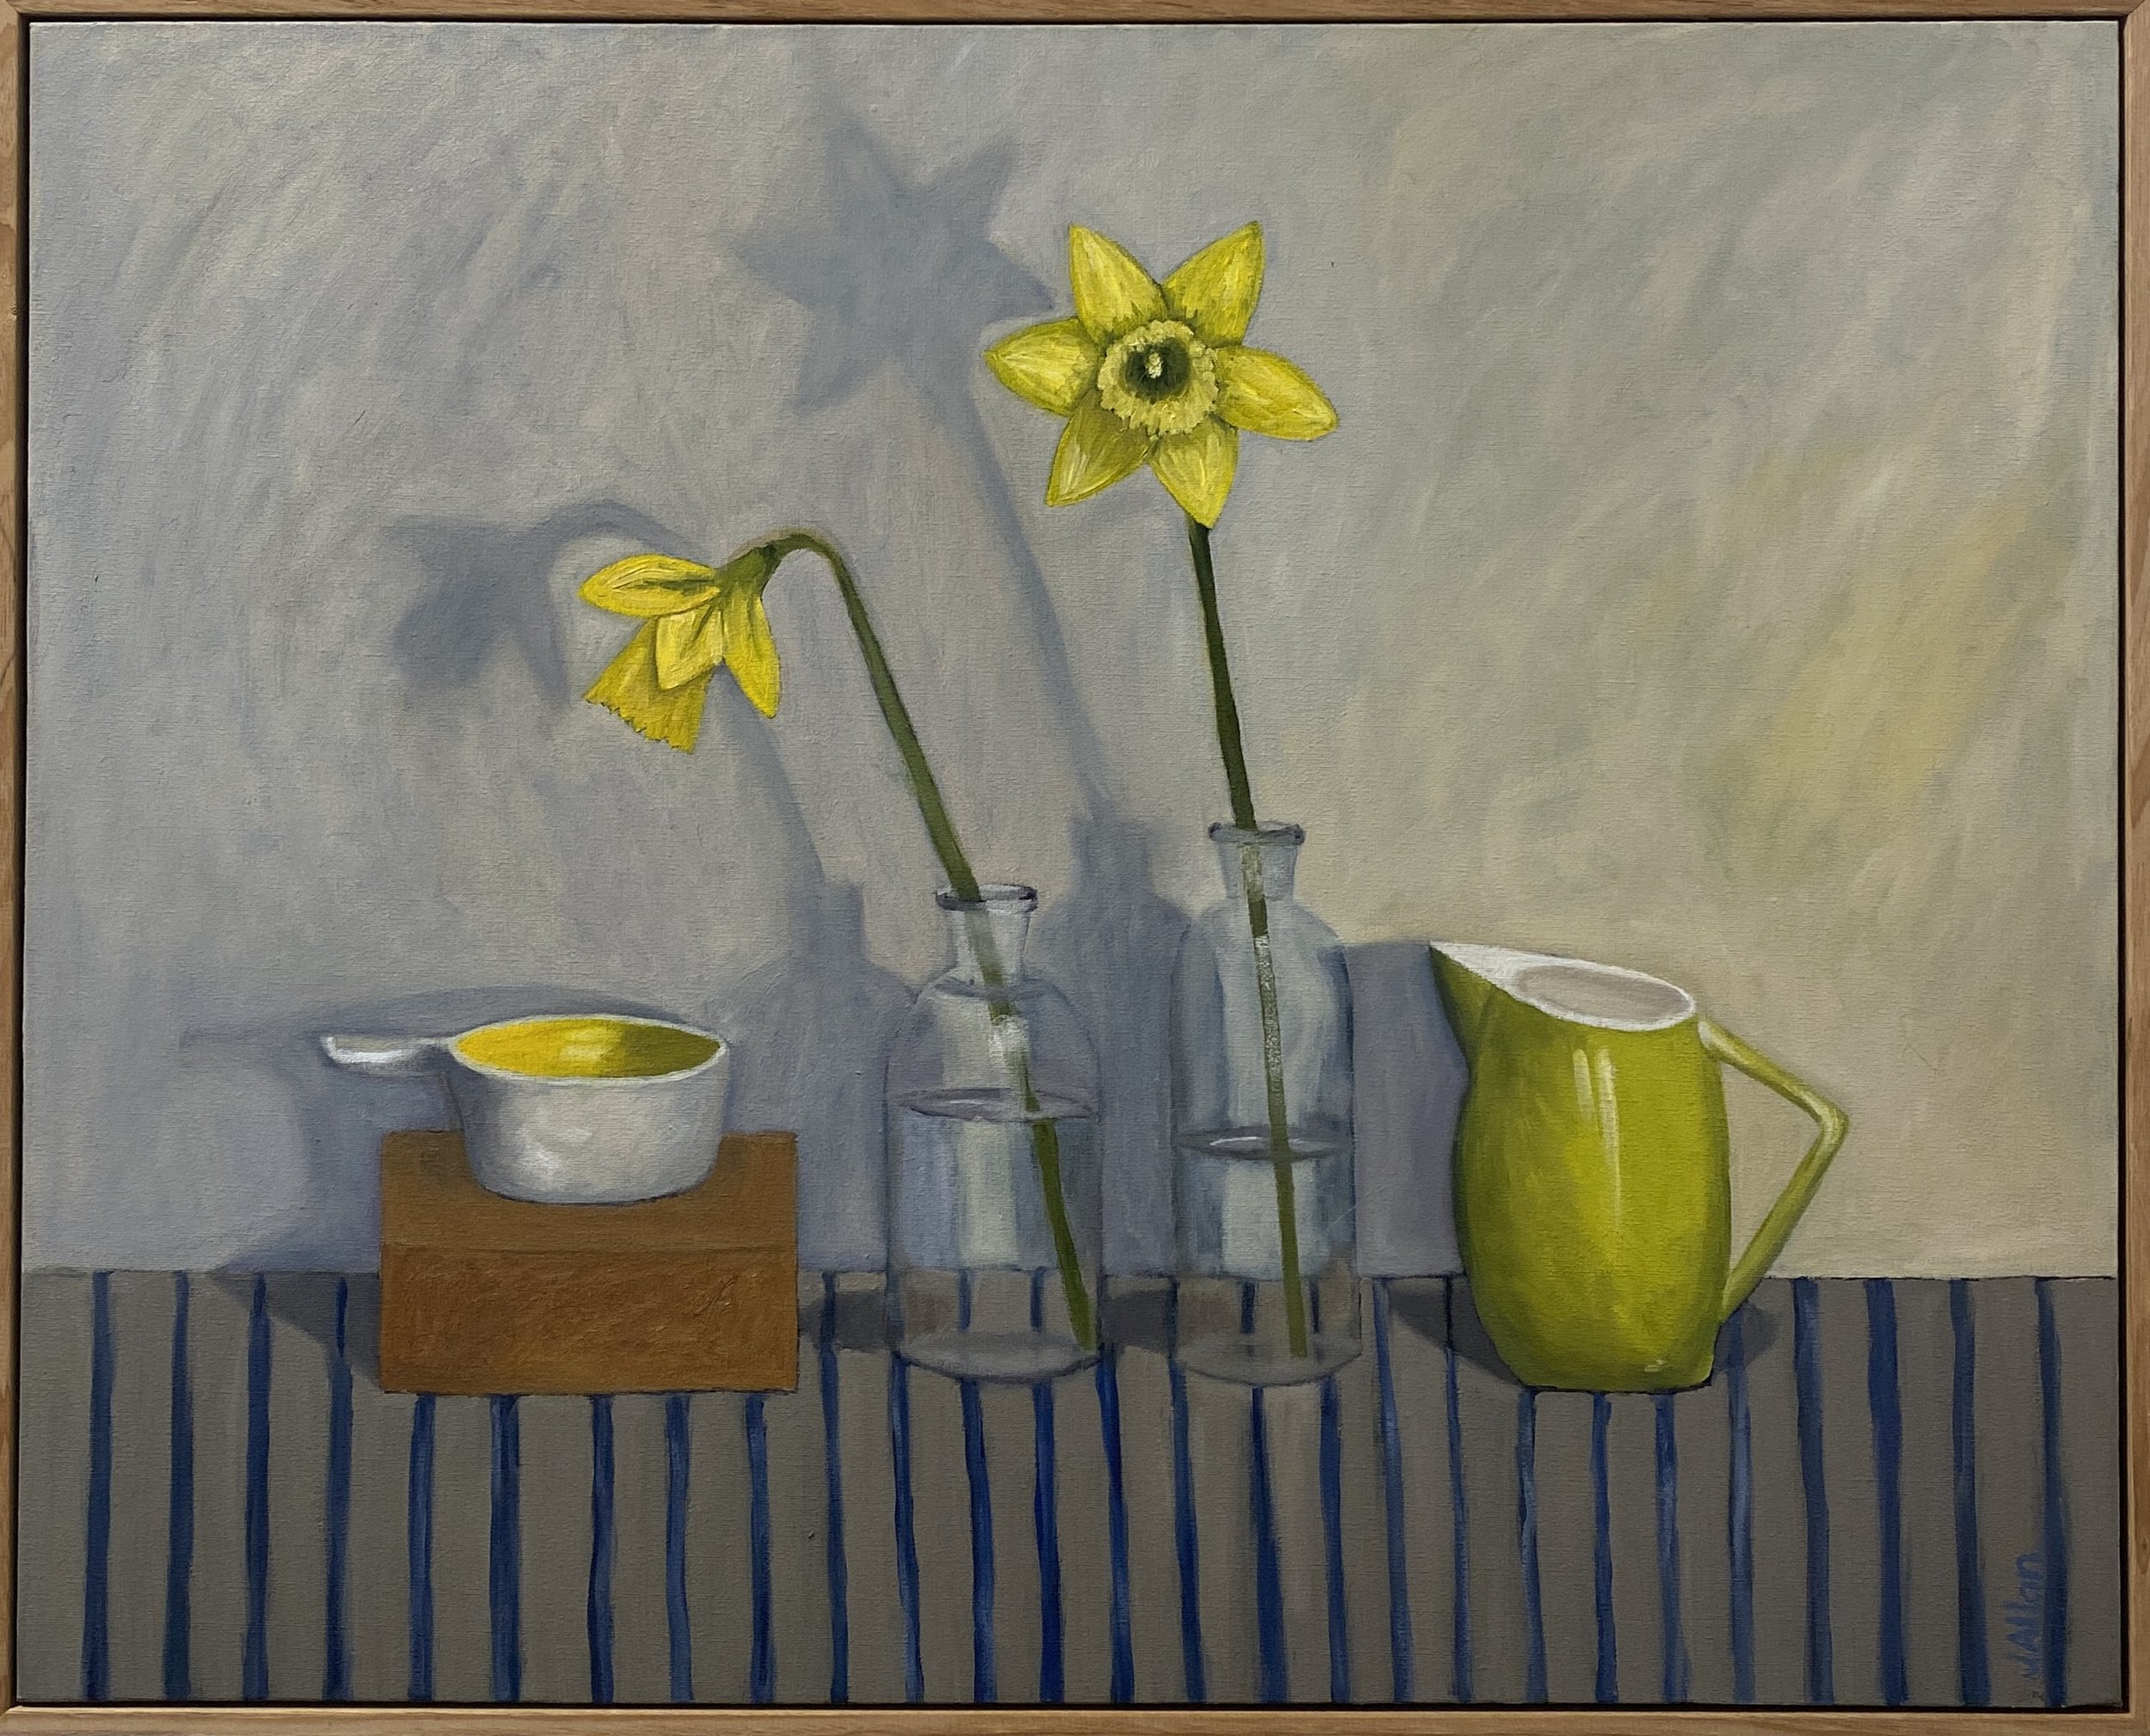 09. Daffodils in the Morning Light | $1500 SOLD